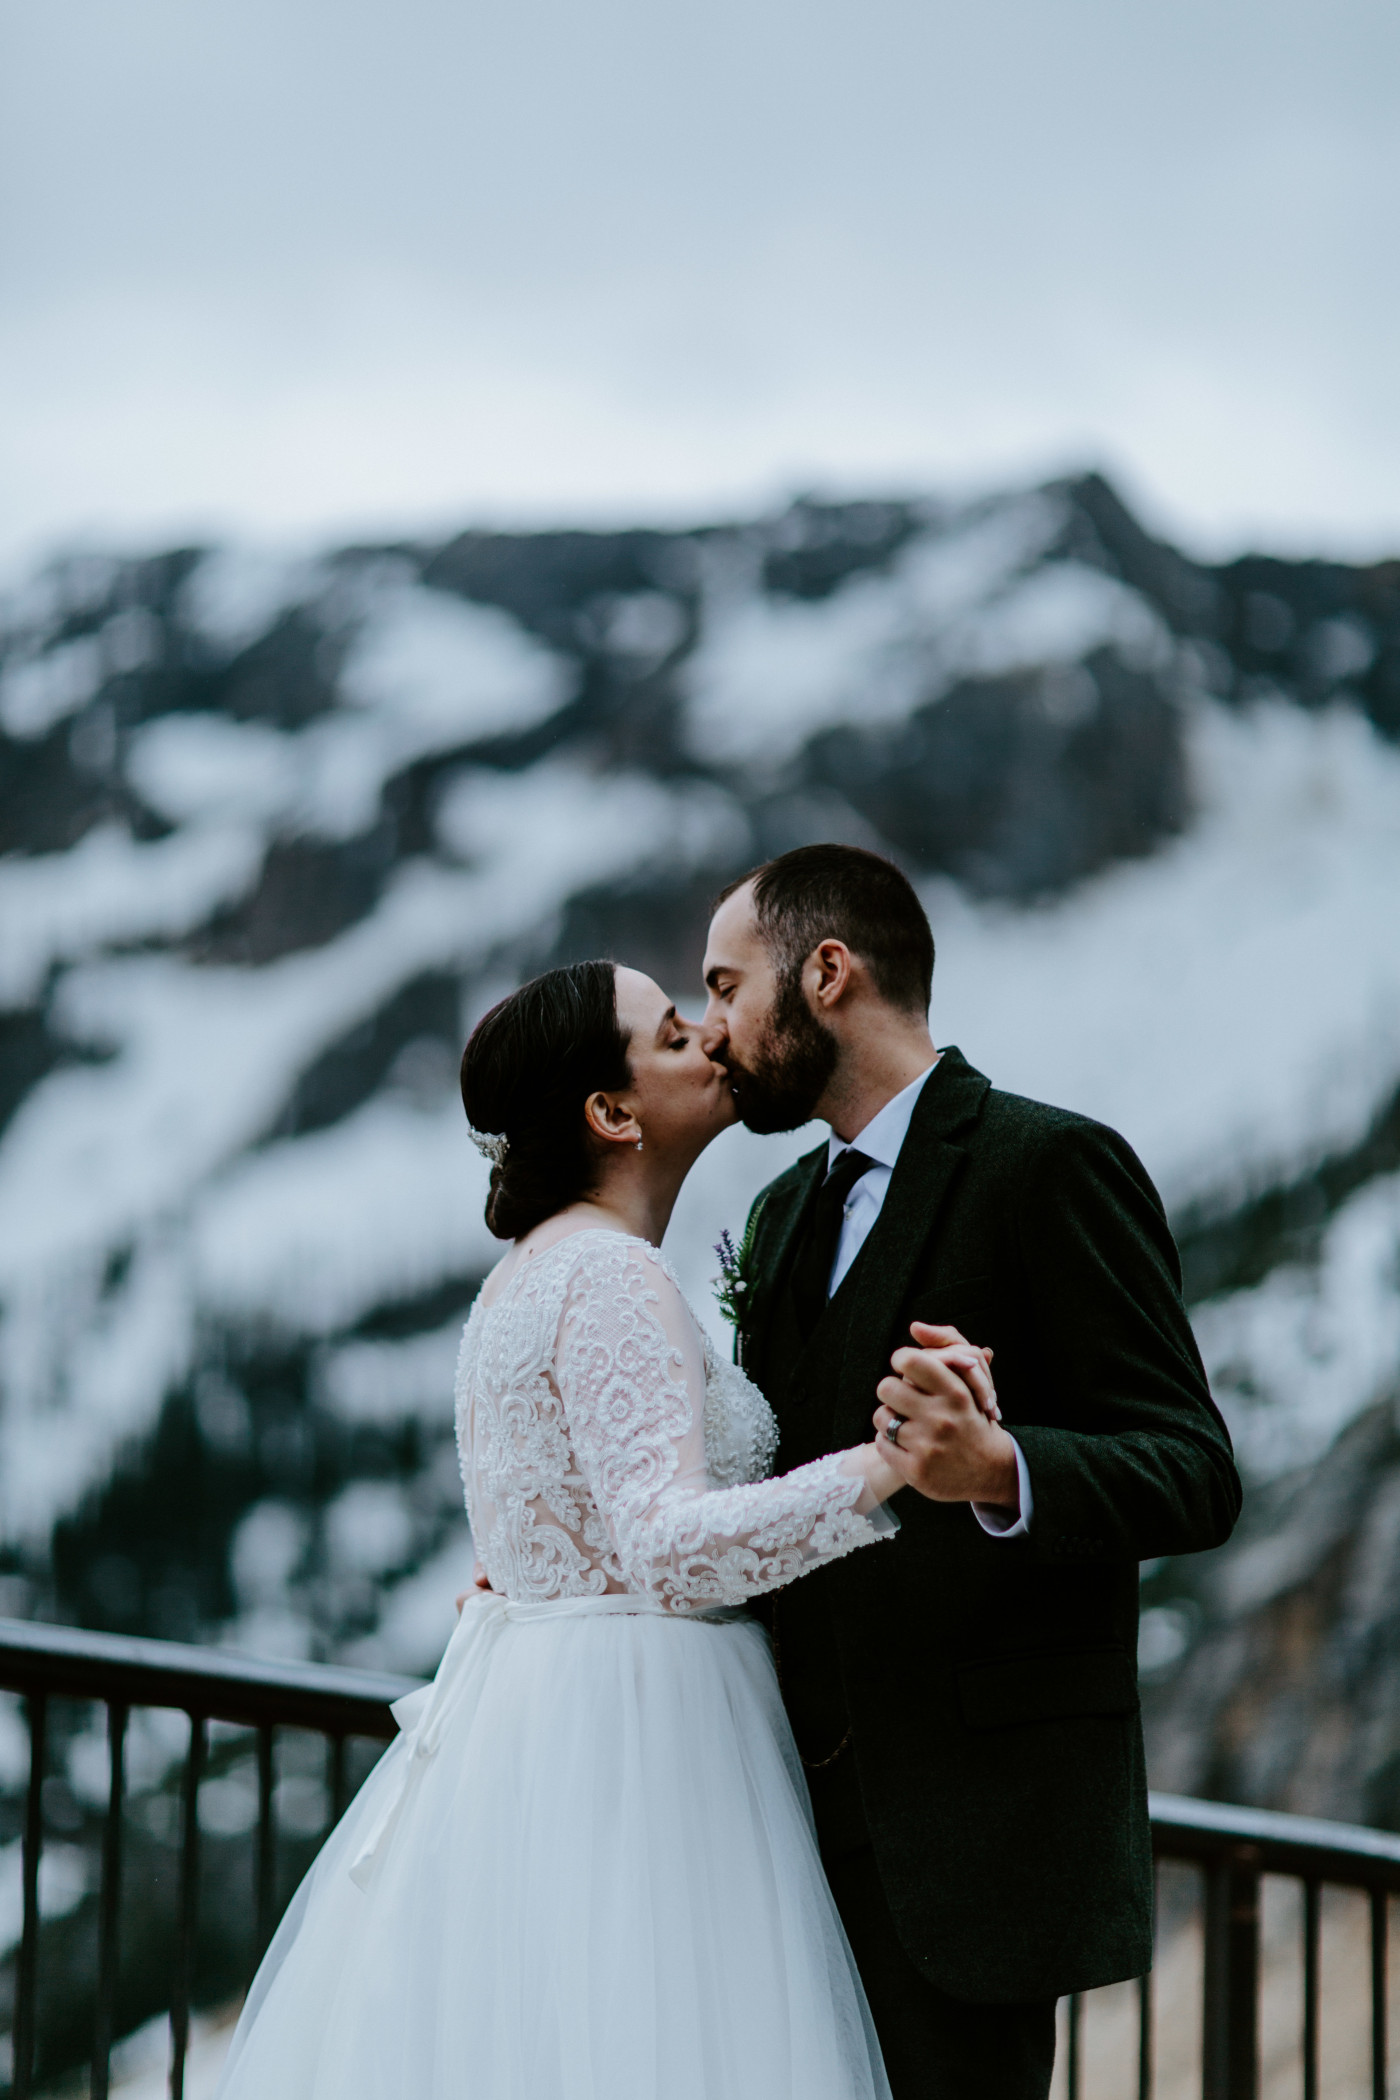 Alex and Elizabeth dance near the North Cascades. Elopement photography at North Cascades National Park by Sienna Plus Josh.